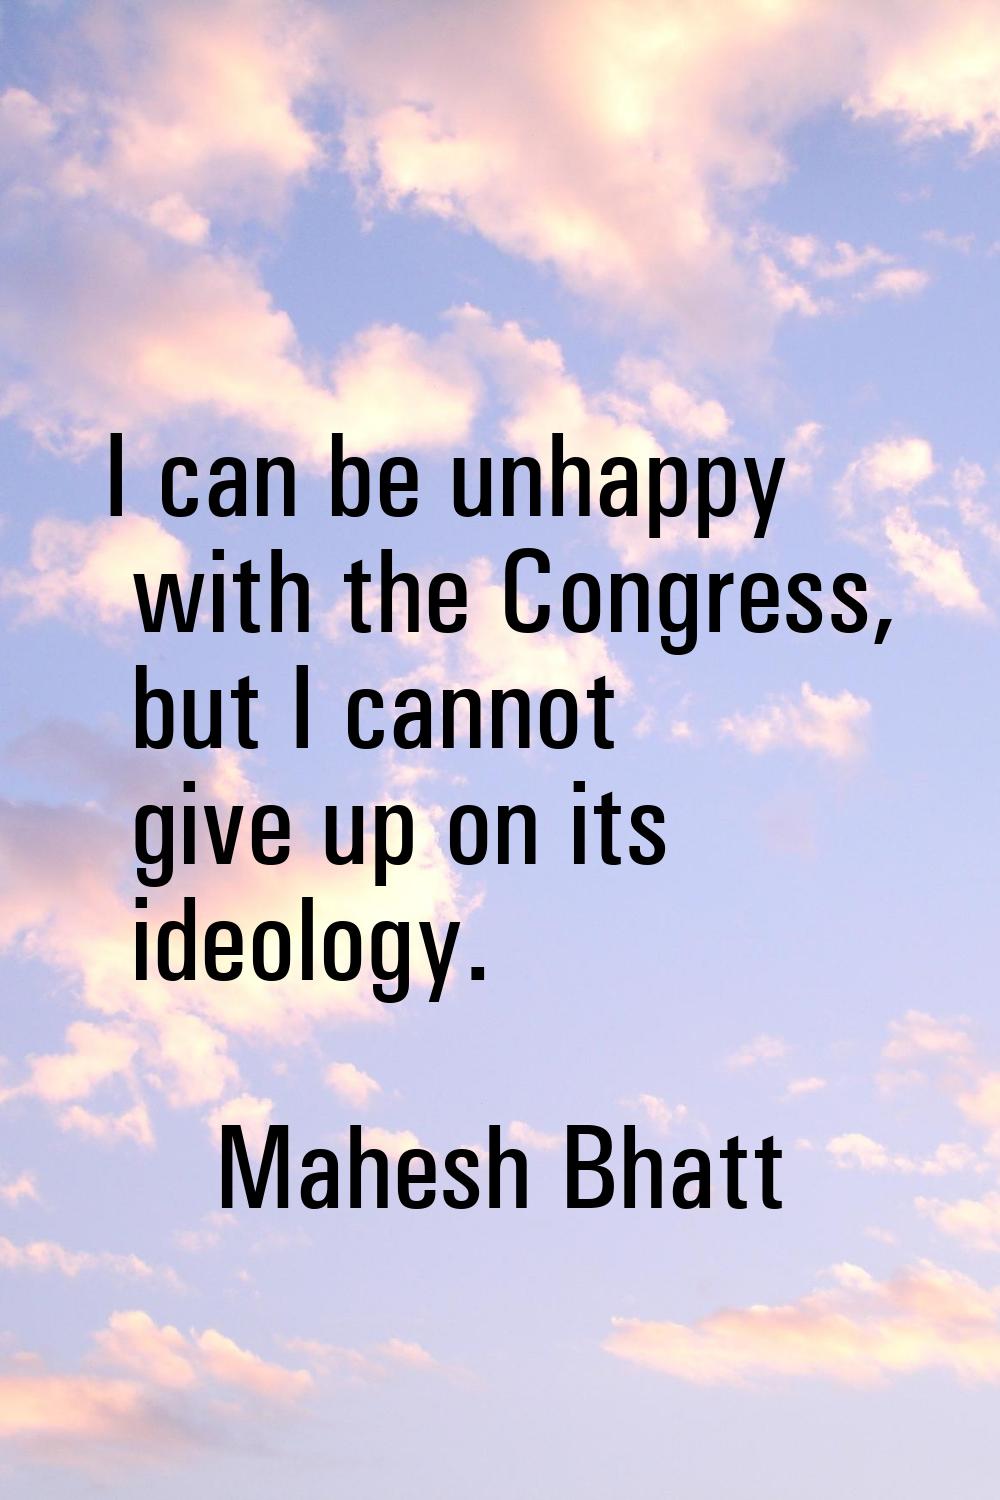 I can be unhappy with the Congress, but I cannot give up on its ideology.